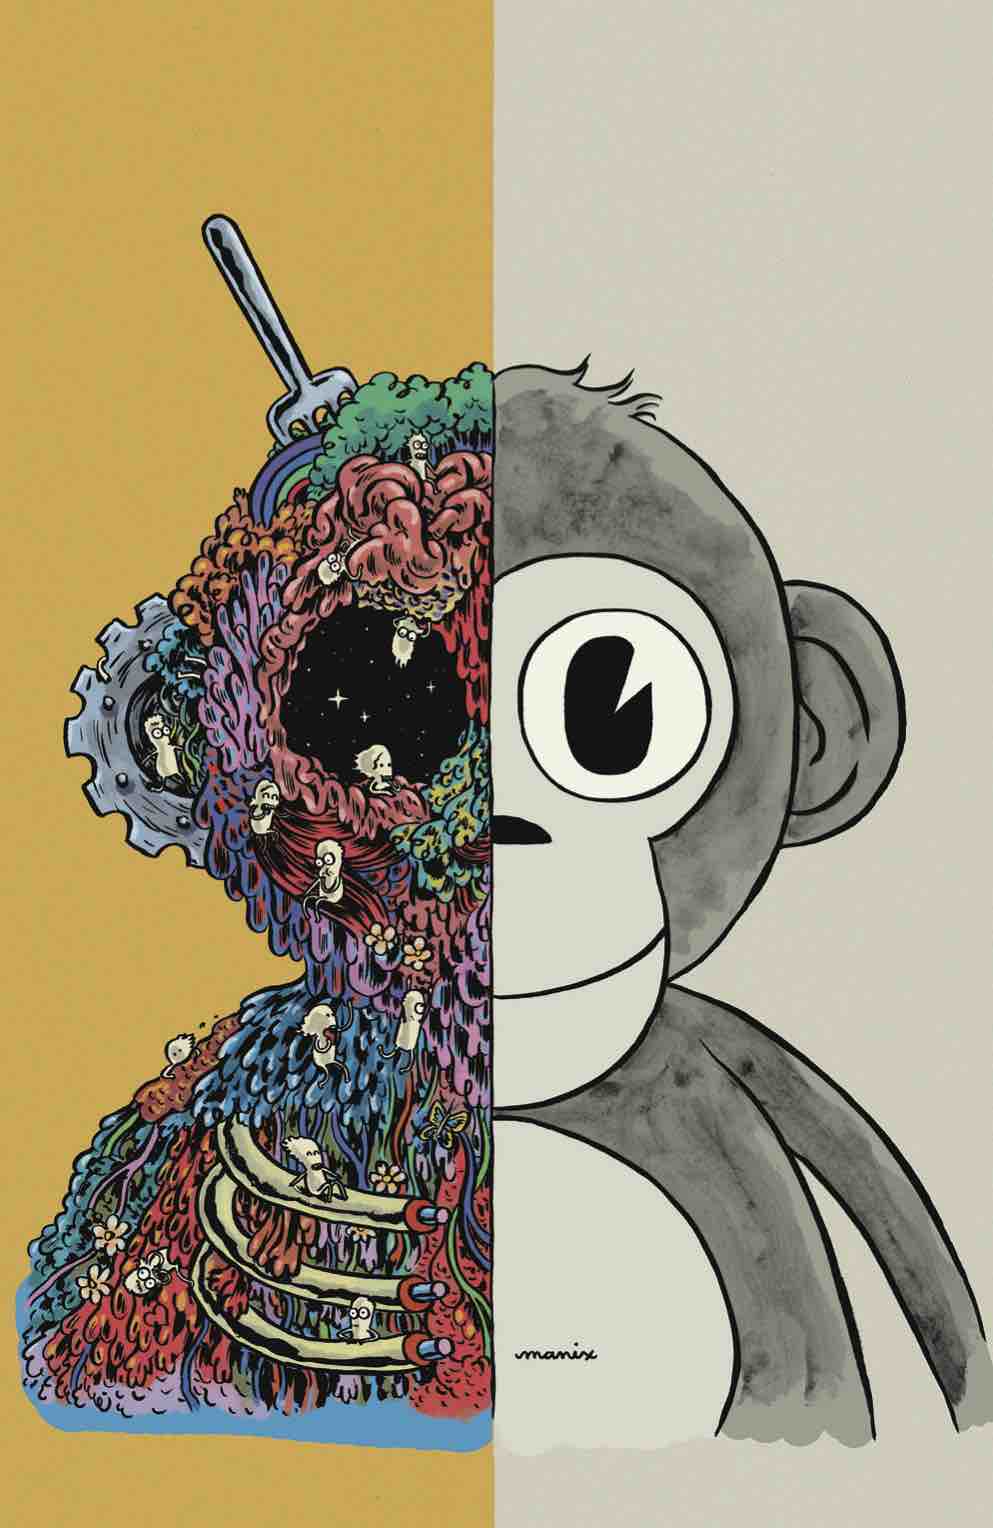 MONKEY MEAT #1 SSCO CO MANIX ABRERA EXCLUSIVE VARIANT 2022